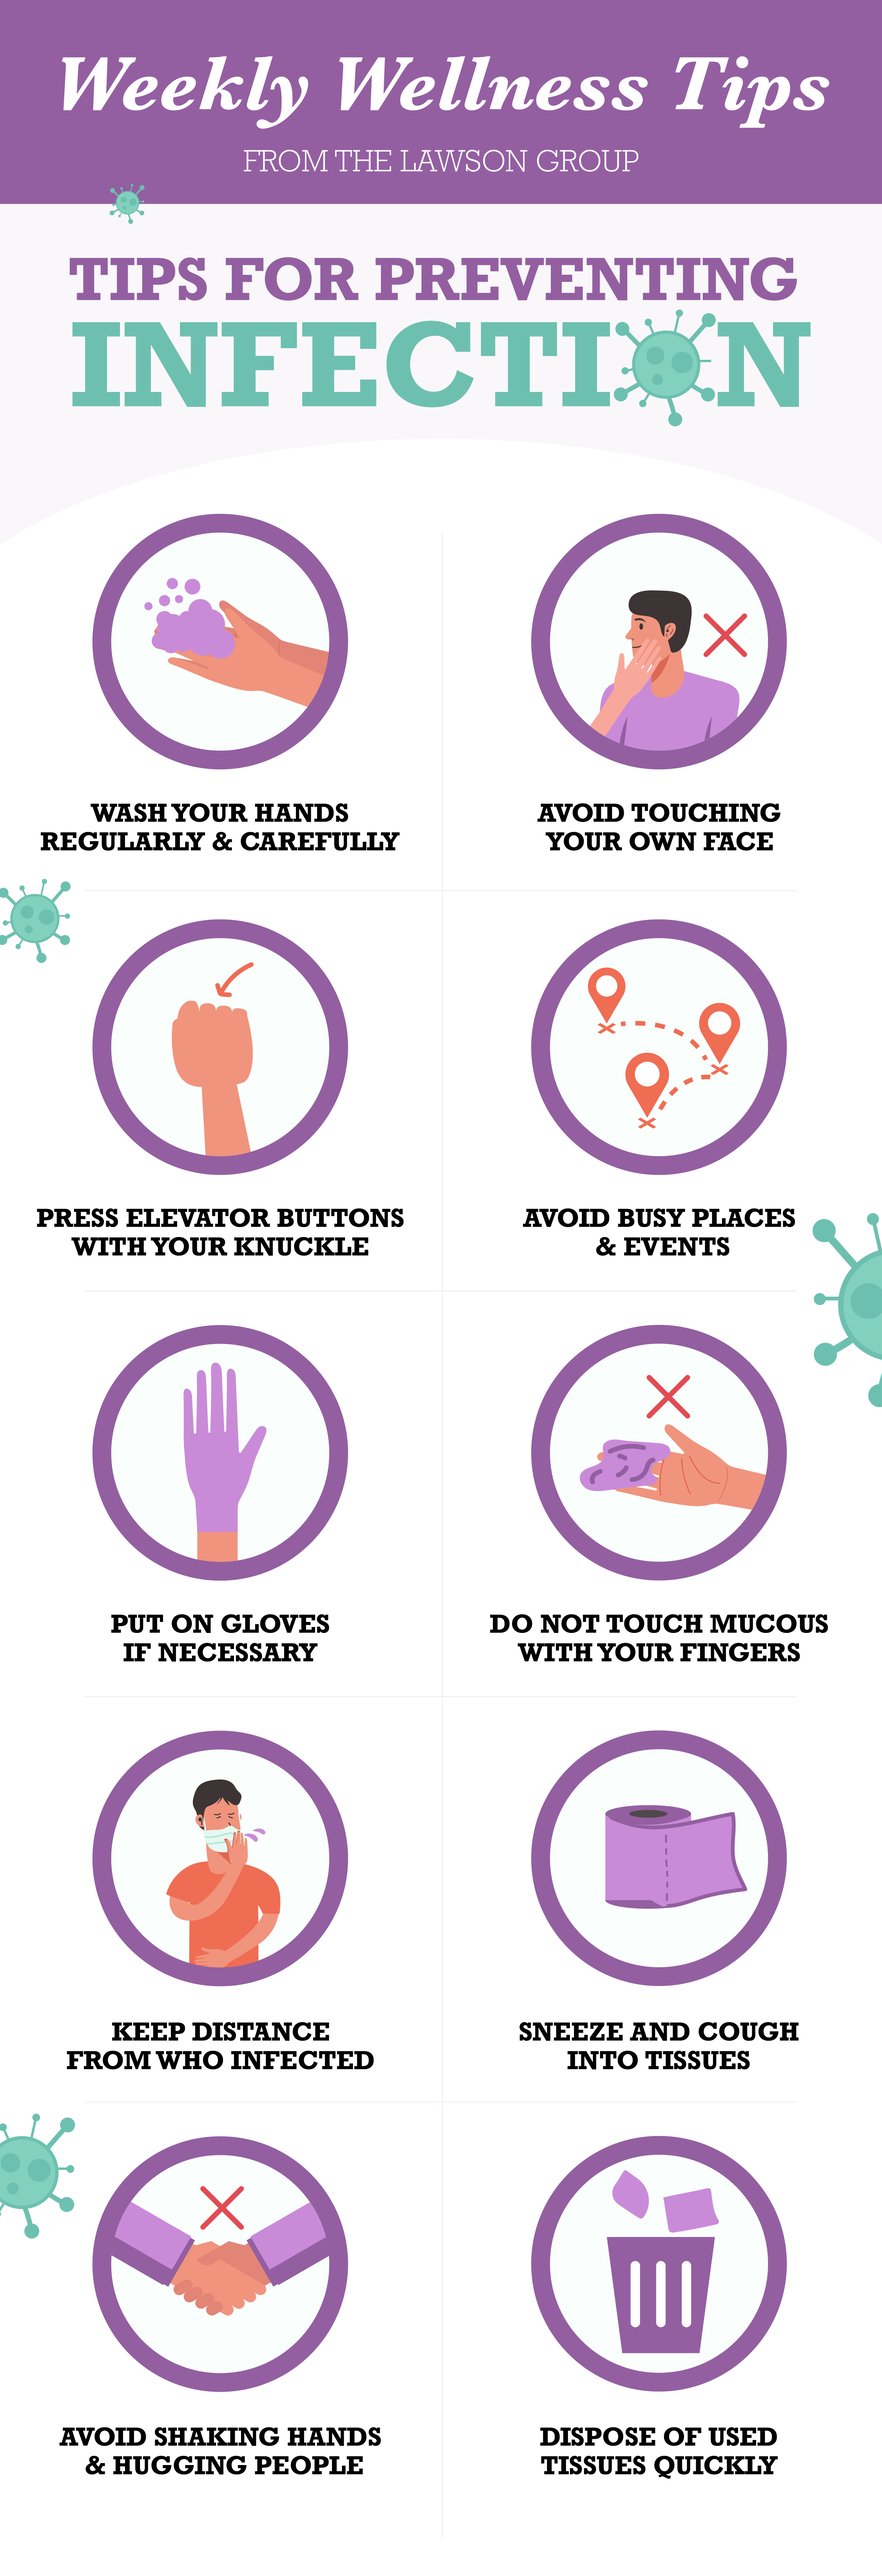 TLG22005 Wellness Tips Preventing Infection Infographic-1080px-01